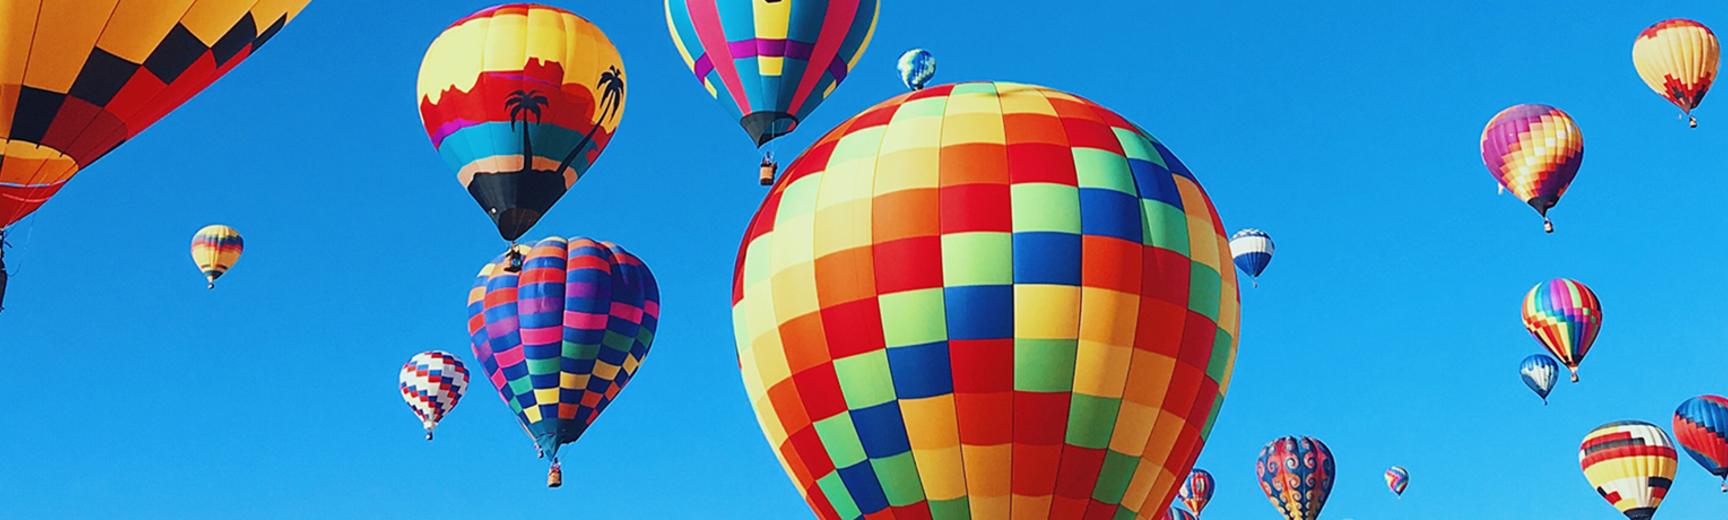 Image of colourful hot air balloons